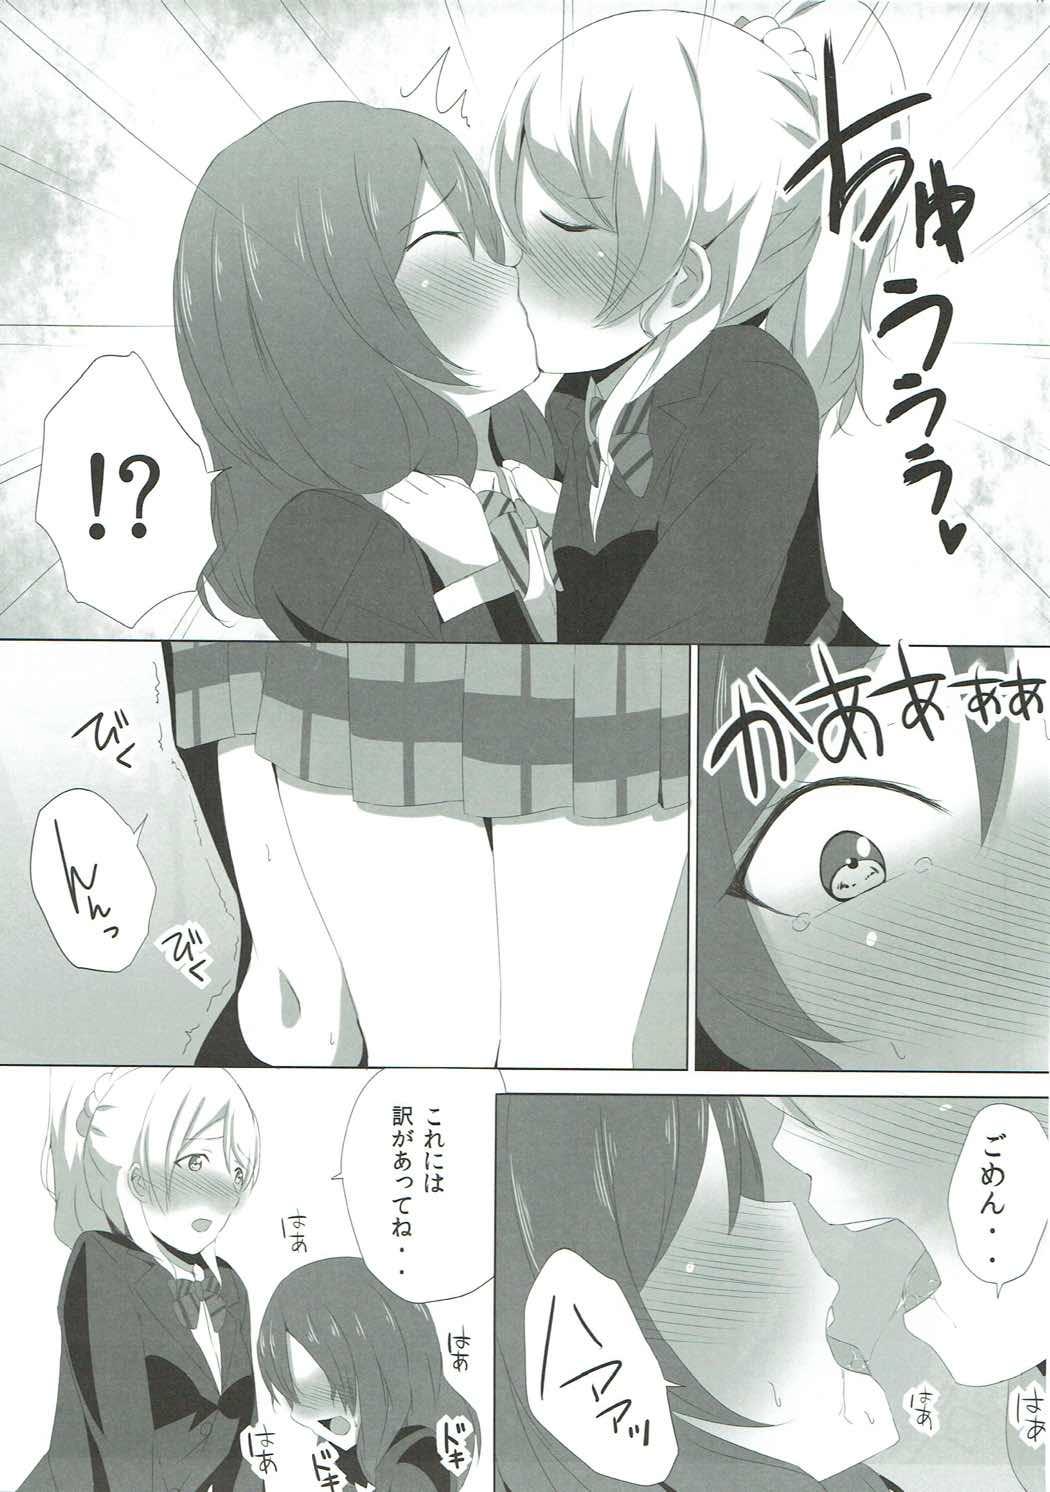 Star LOVE! LOVE! FESTIVAL!! 5 - Love live 18yearsold - Page 8